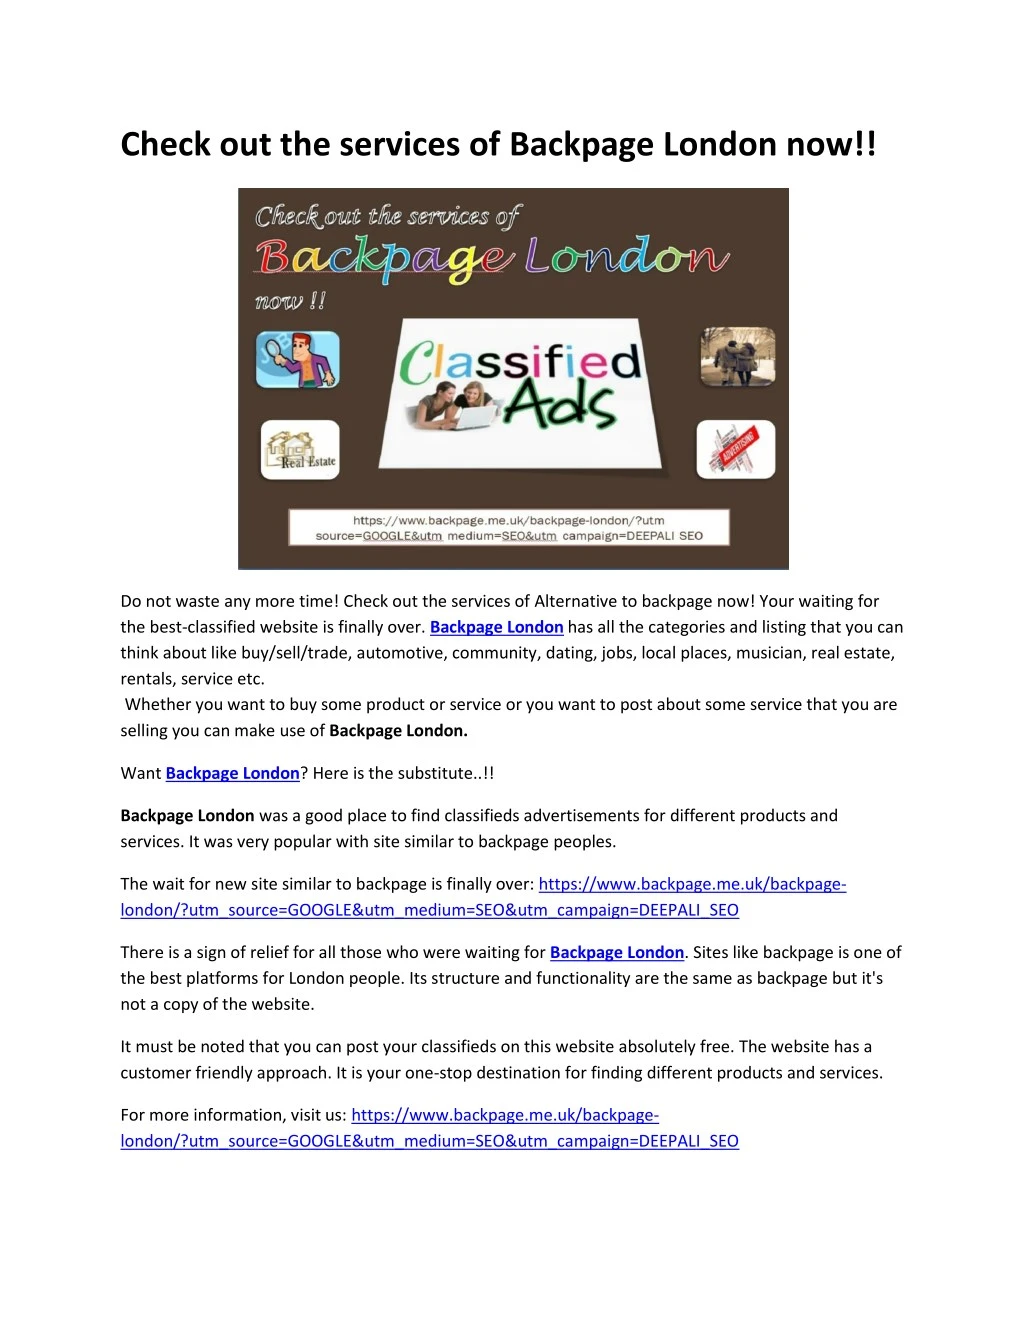 check out the services of backpage london now